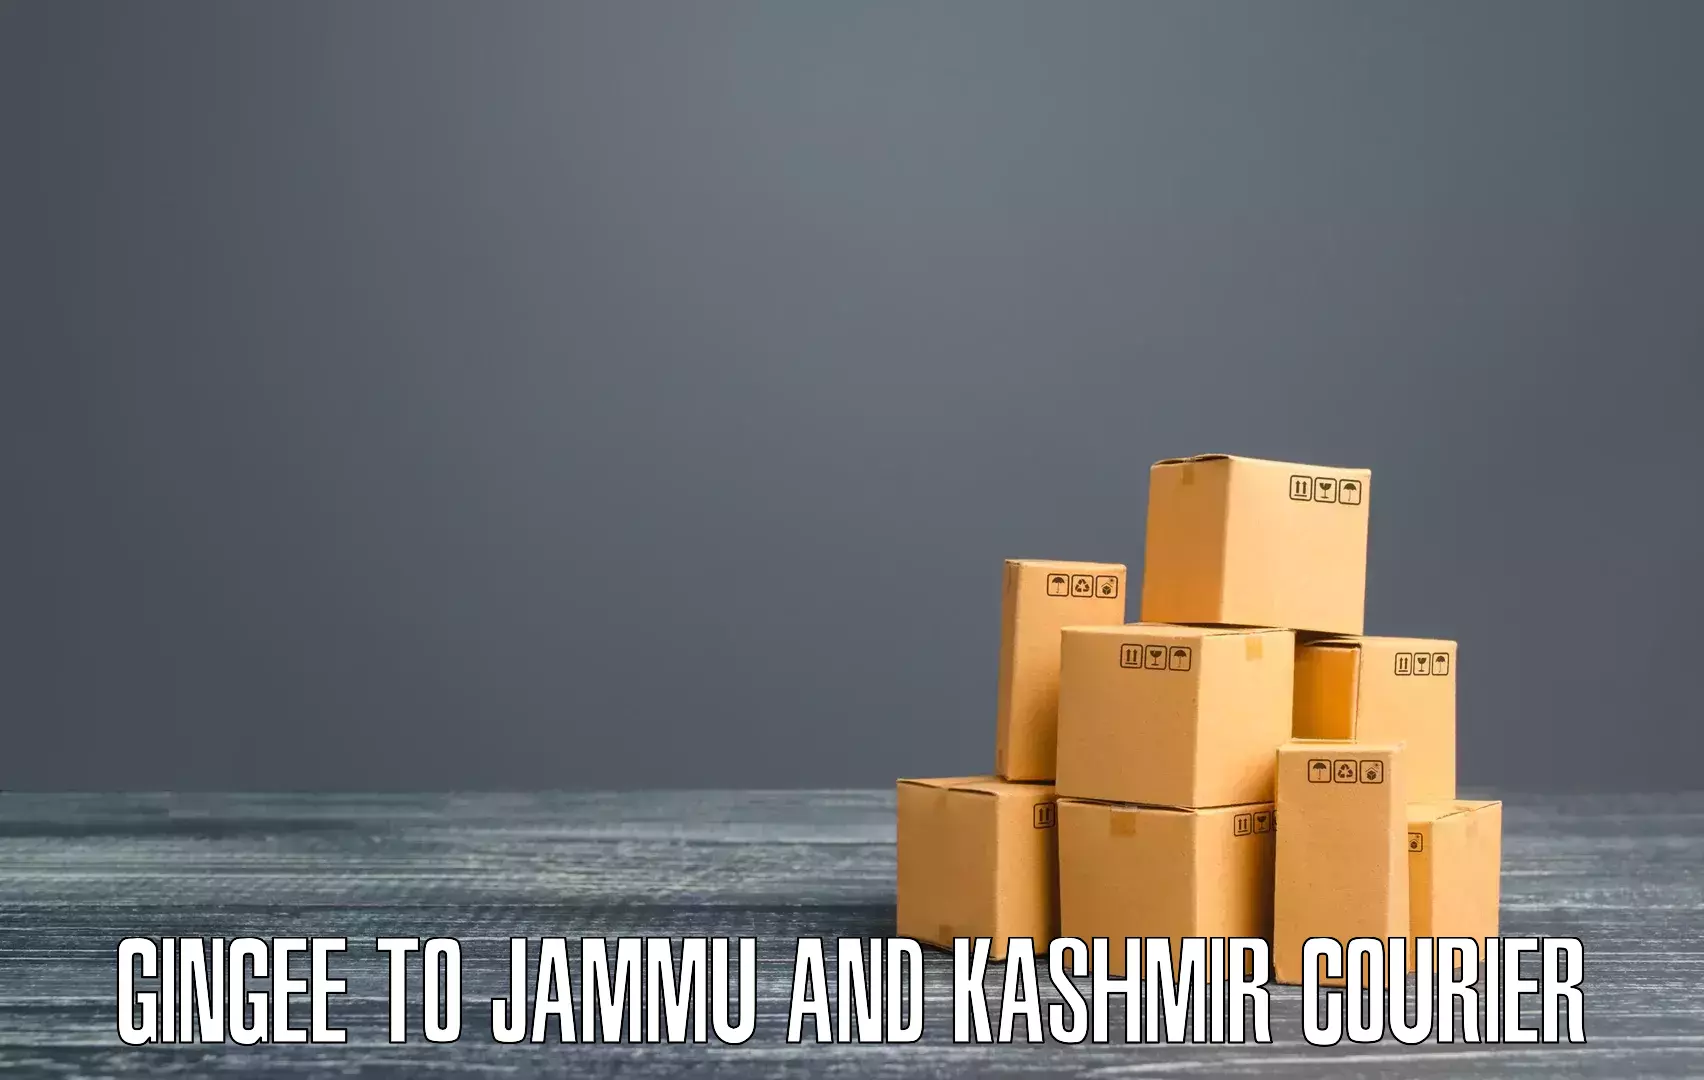 24-hour courier service Gingee to Jammu